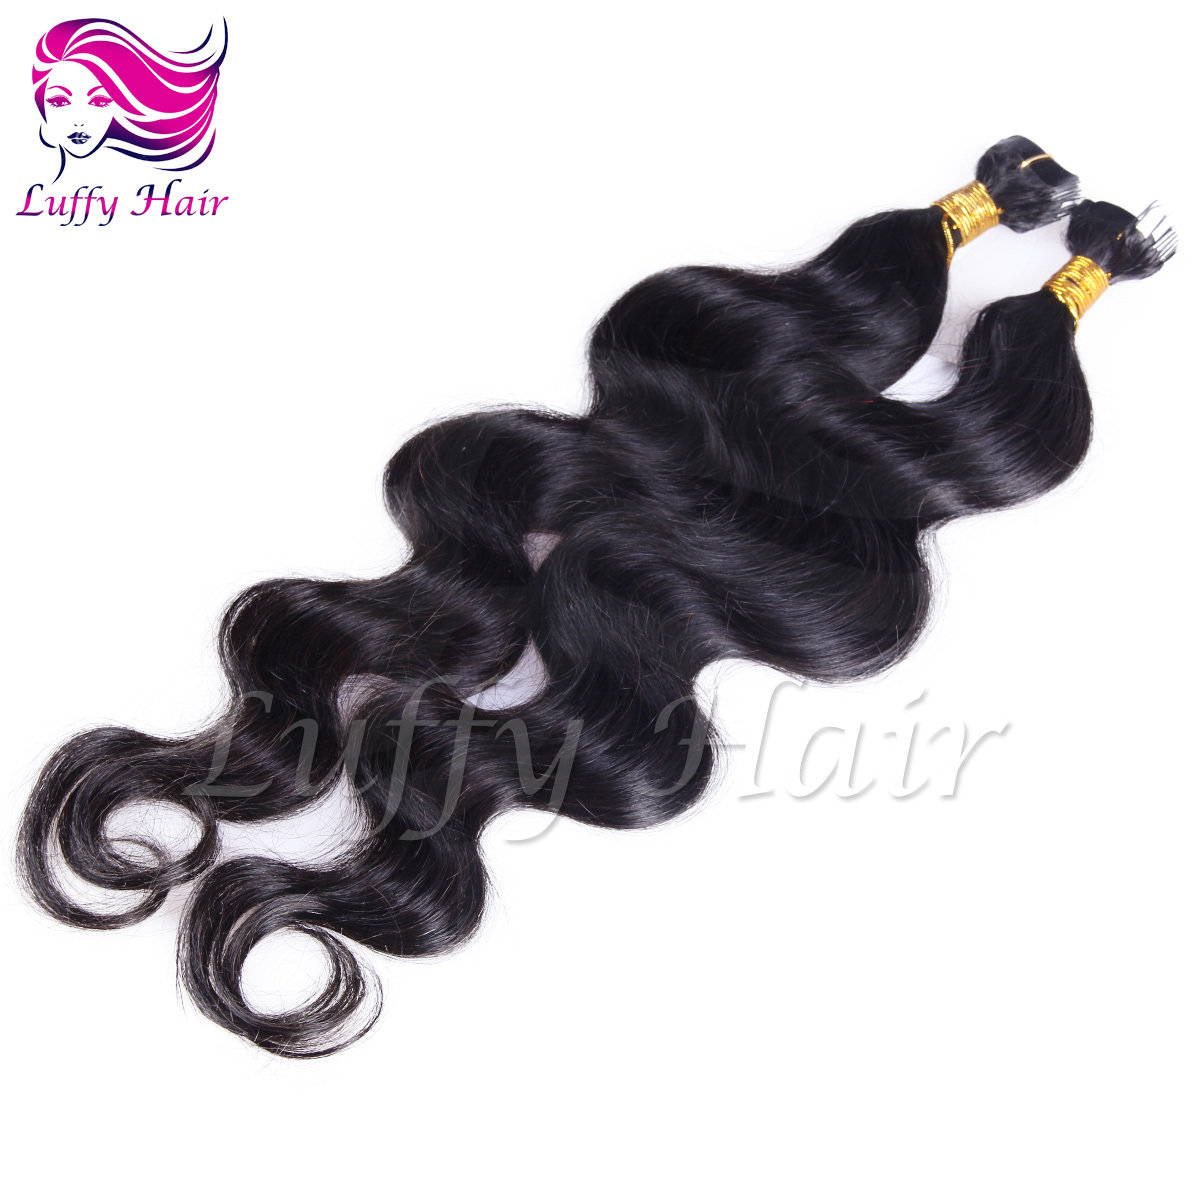 Body Wave Tape In Hair Extensions - KTL002